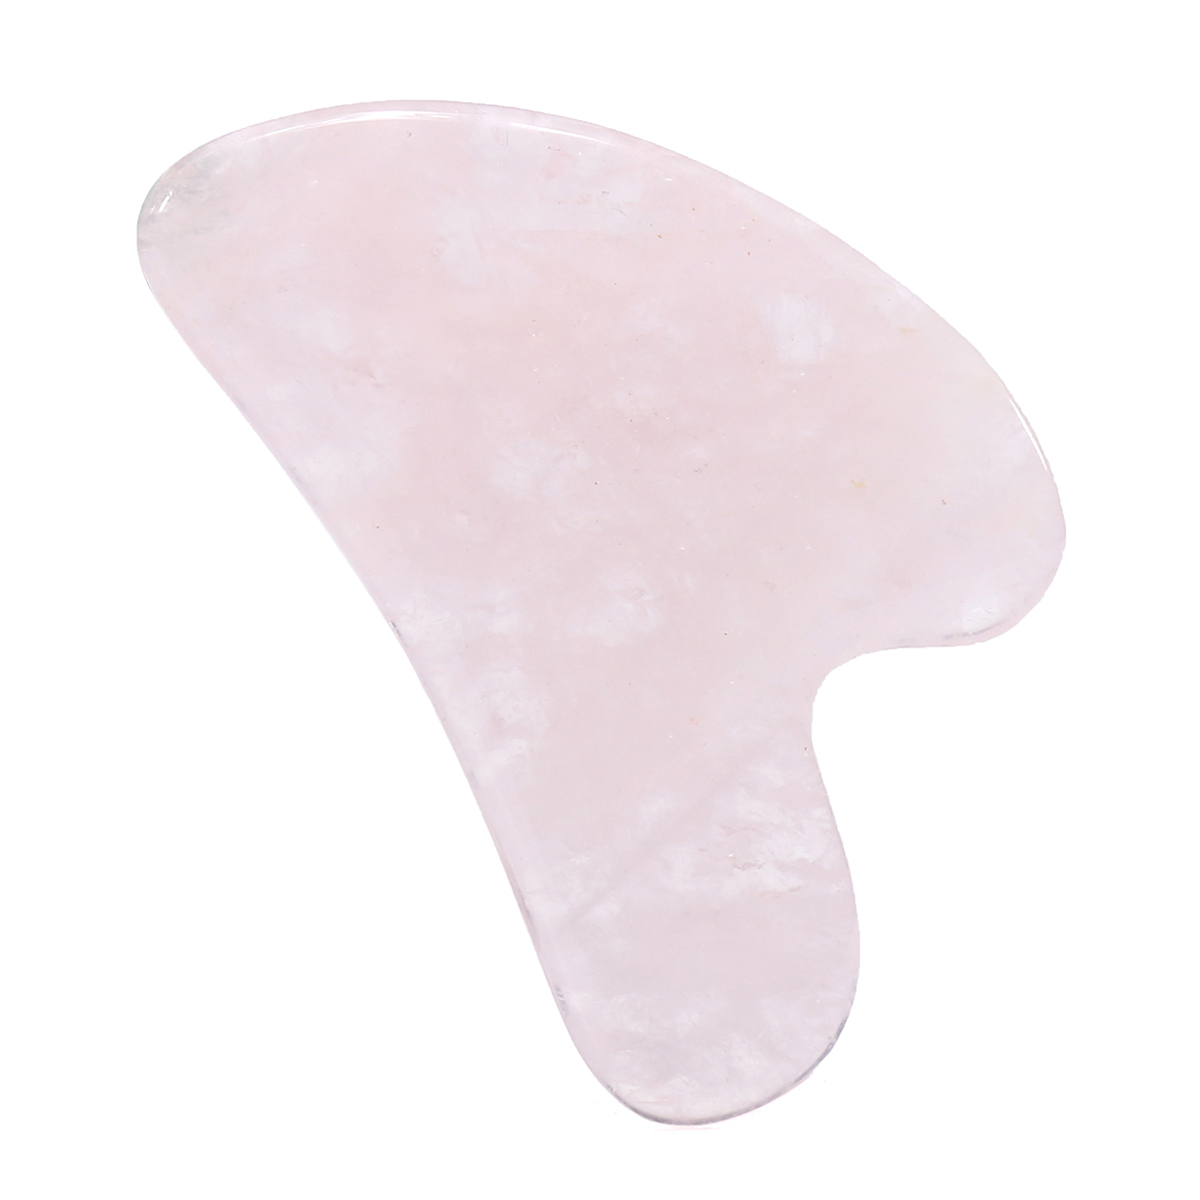 

Natural Rose Quartz Jade Stone Gua Sha Board Manual Scraping Plate Face Body SPA Acupuncture Massage Relaxation Massager